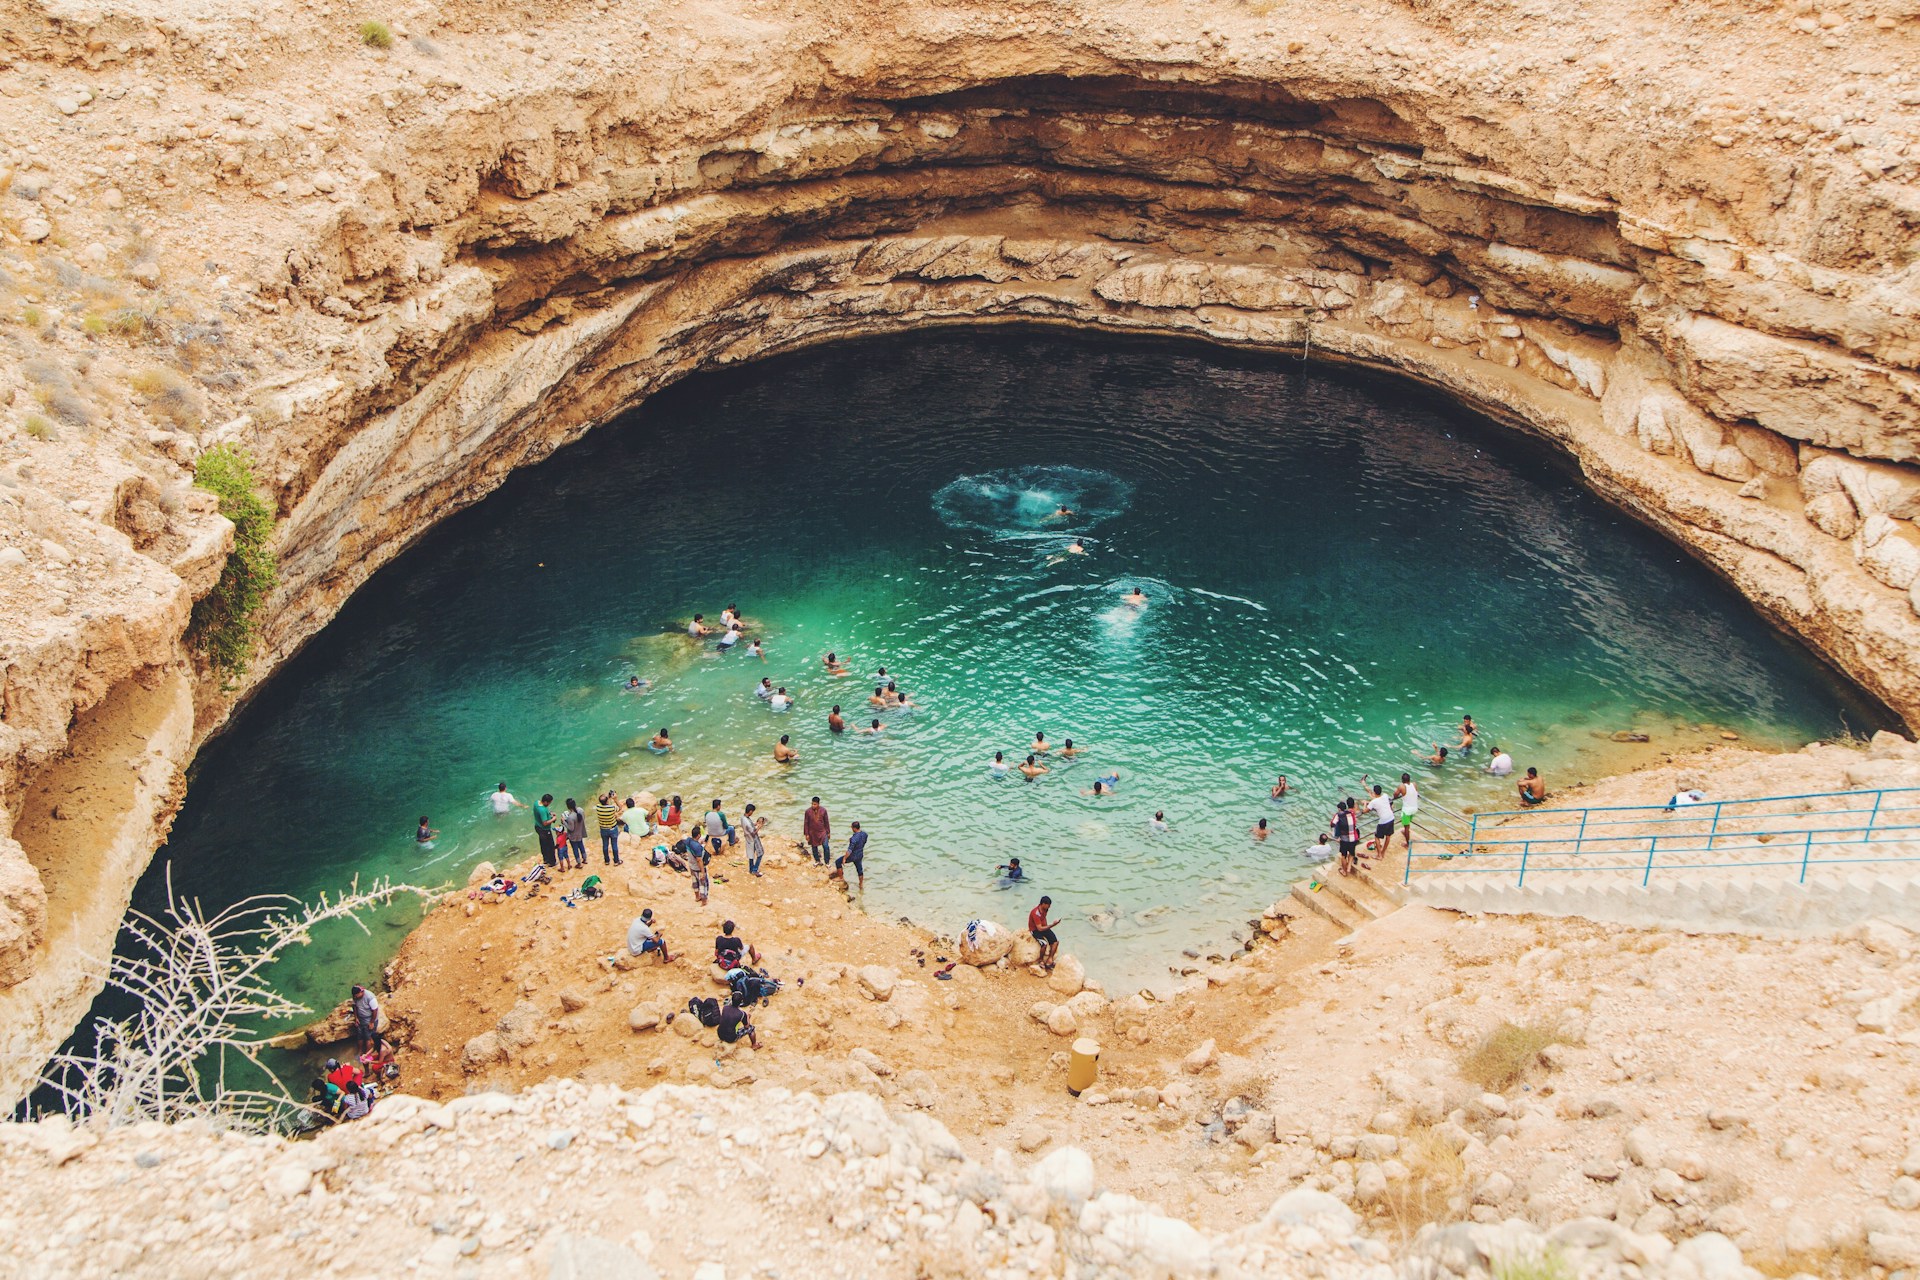 people at a swimming hole in a cavern